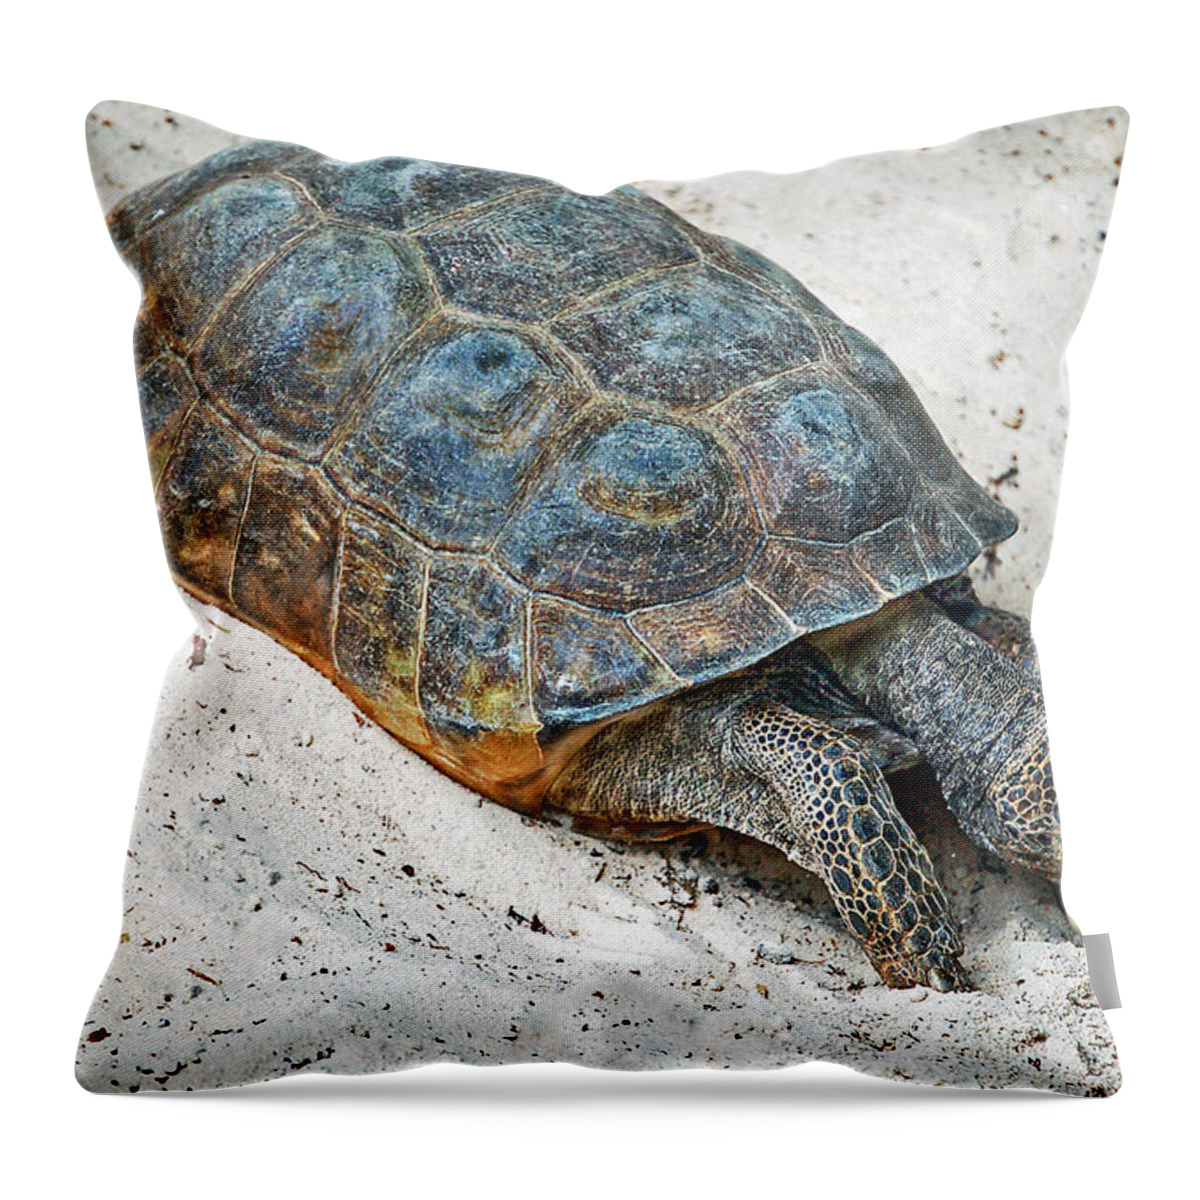 Tortoise Throw Pillow featuring the photograph Creeping Along by Donna Proctor